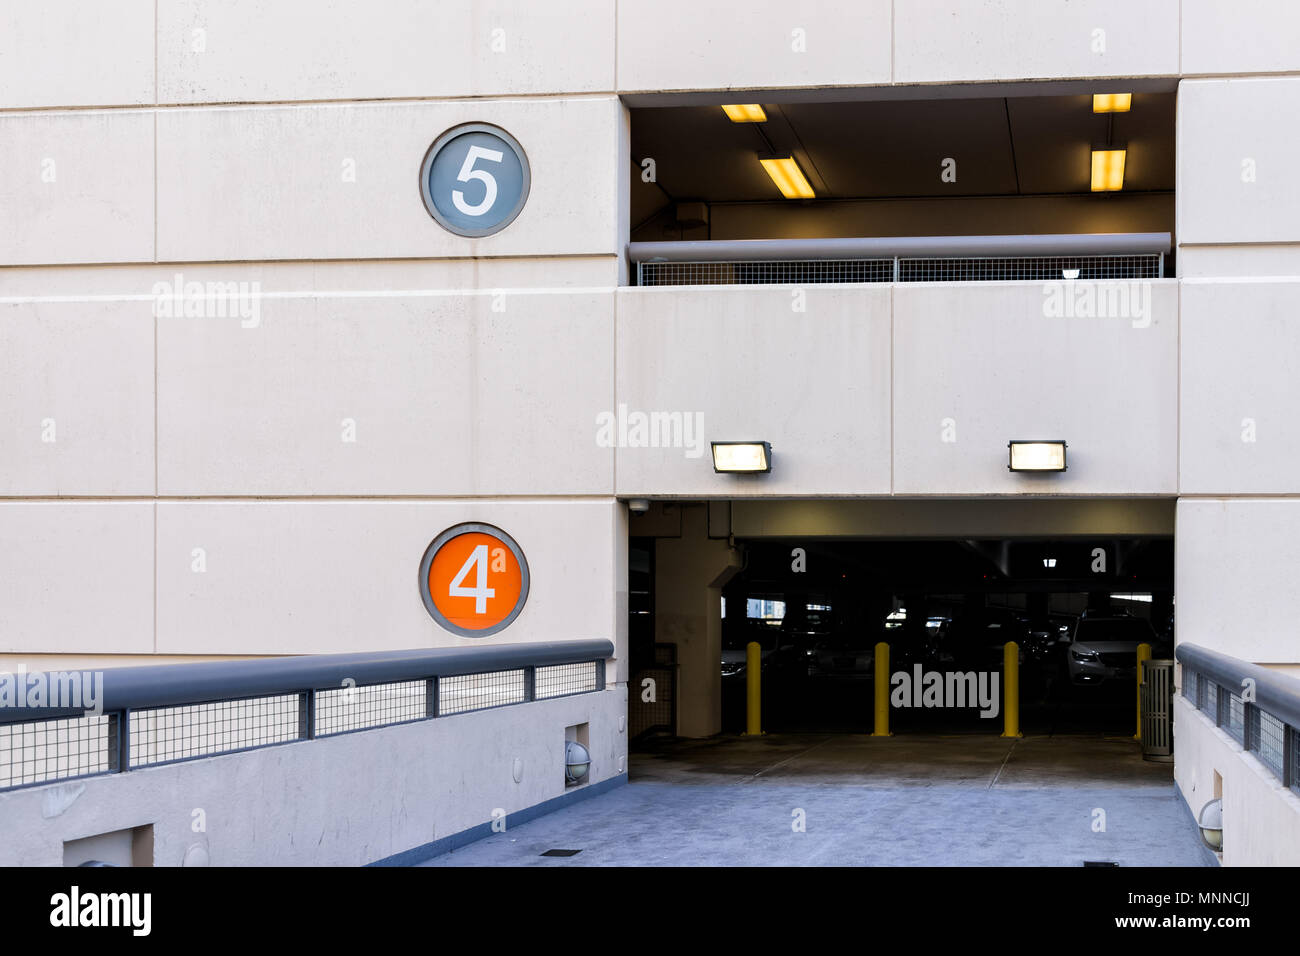 Retail department store mall parking garage with colorful color coded numbers for story level, cars, bridge passage to high building Stock Photo